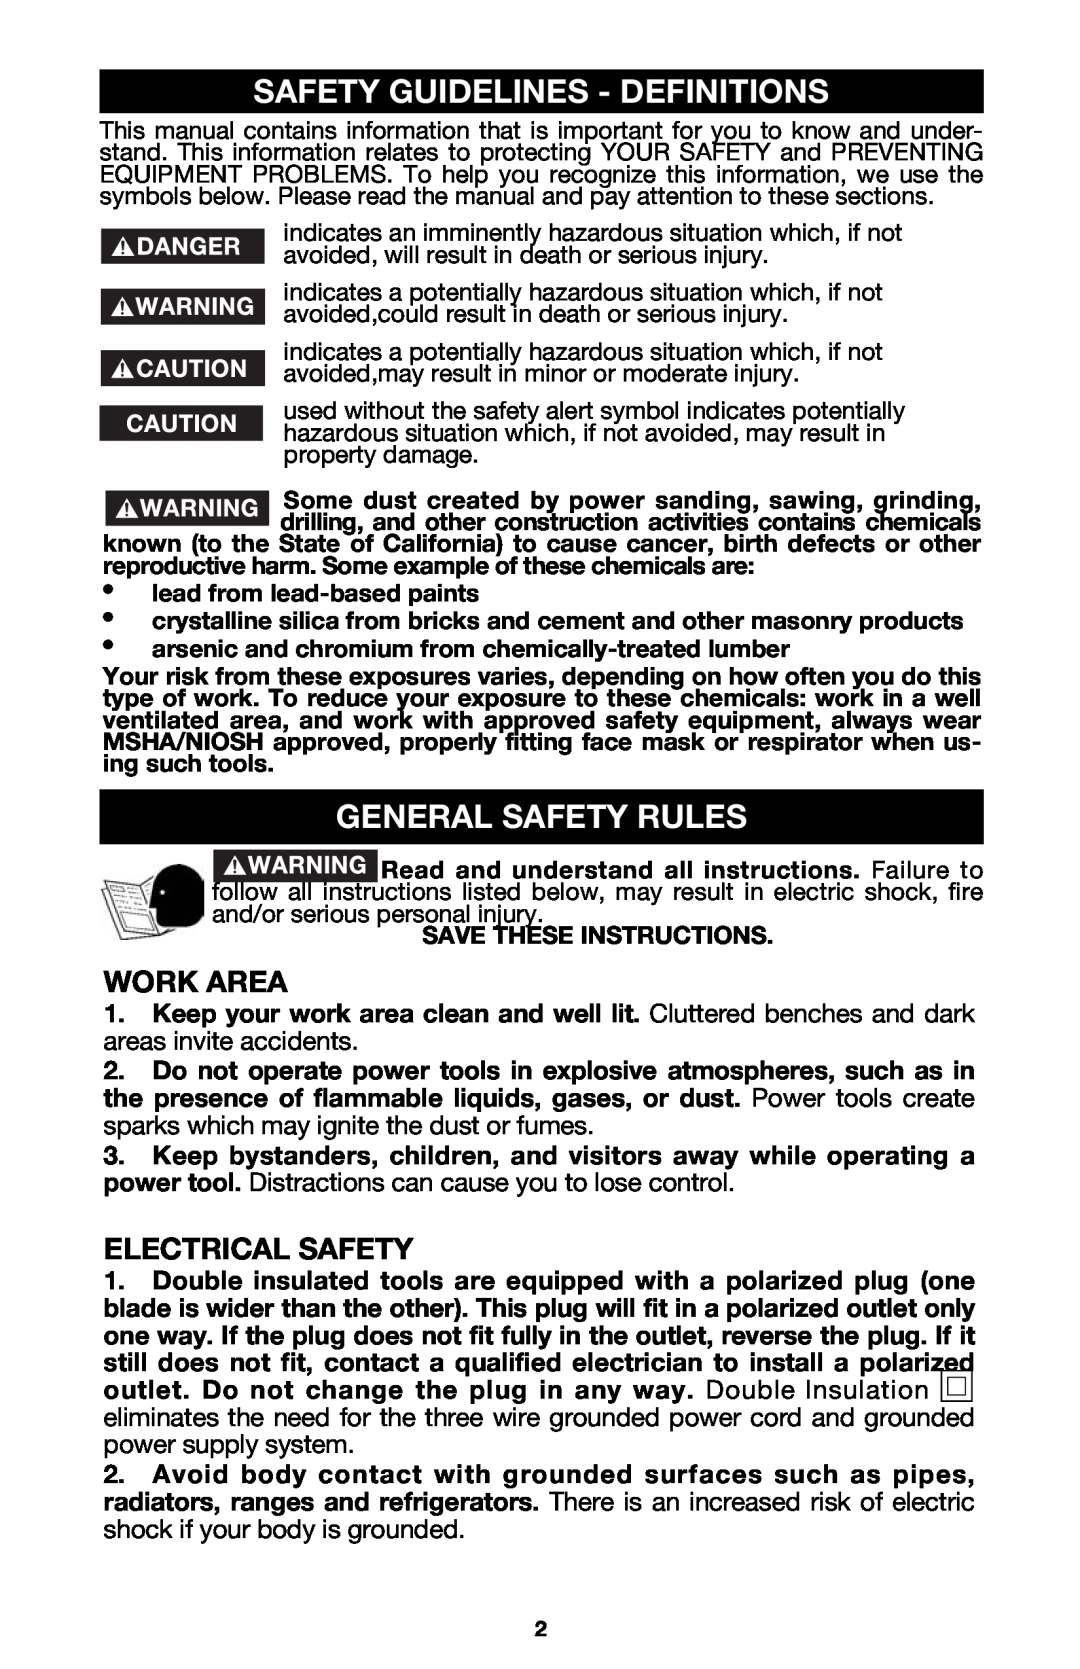 Porter-Cable 423MAG, 424MAG Safety Guidelines - Definitions, General Safety Rules, Work Area, Electrical Safety 